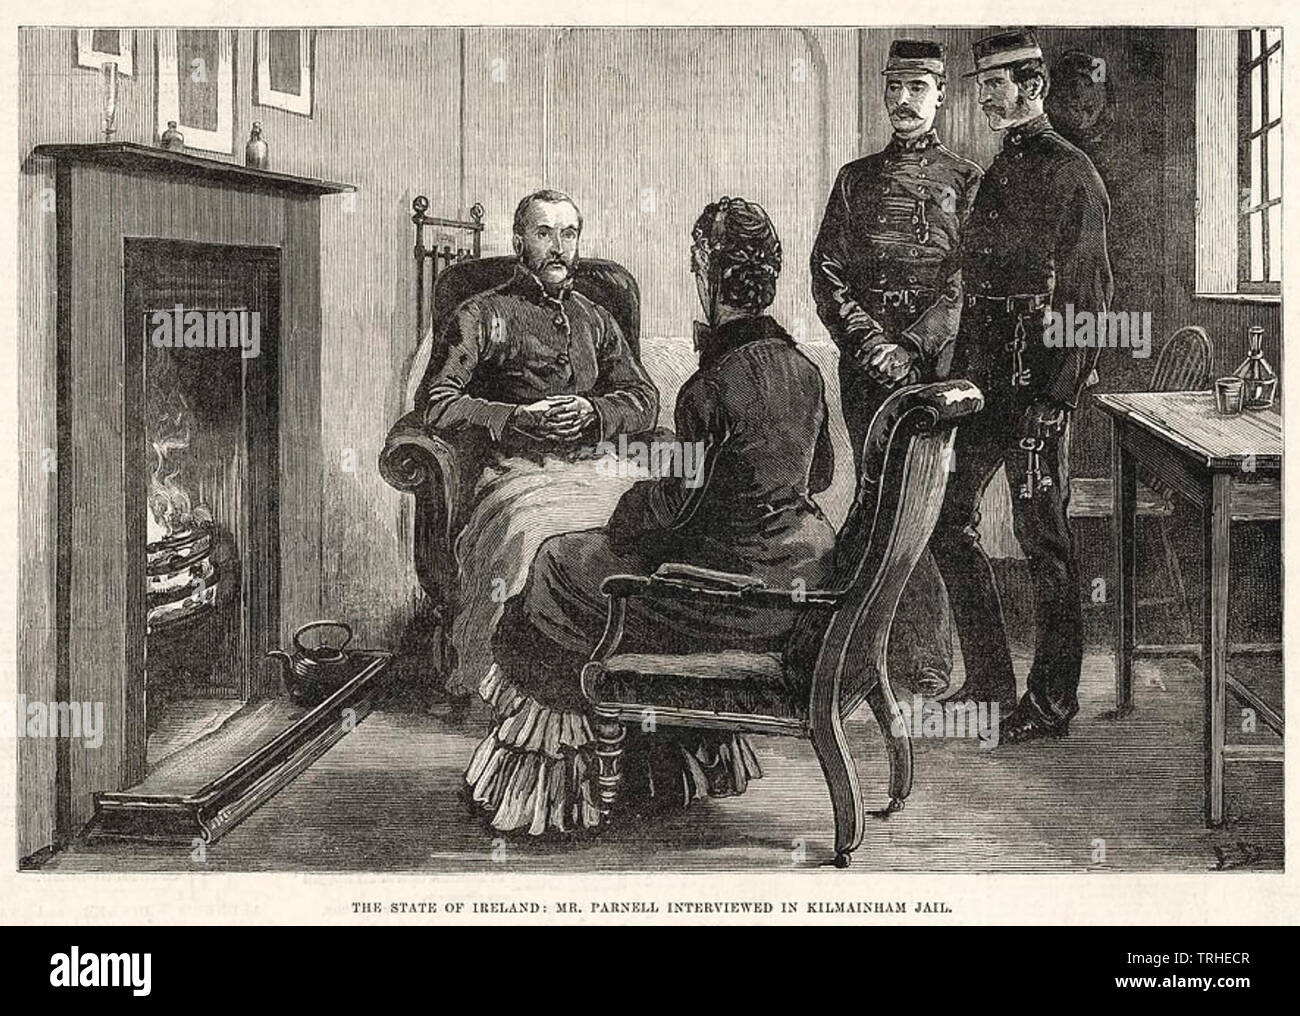 CHARLES STEWART PARNELL (1846-1891)  Ir9sh nationalist politician receiving a visitor in his cell in Kilmainham Gaol in 1881watched by two warders Stock Photo